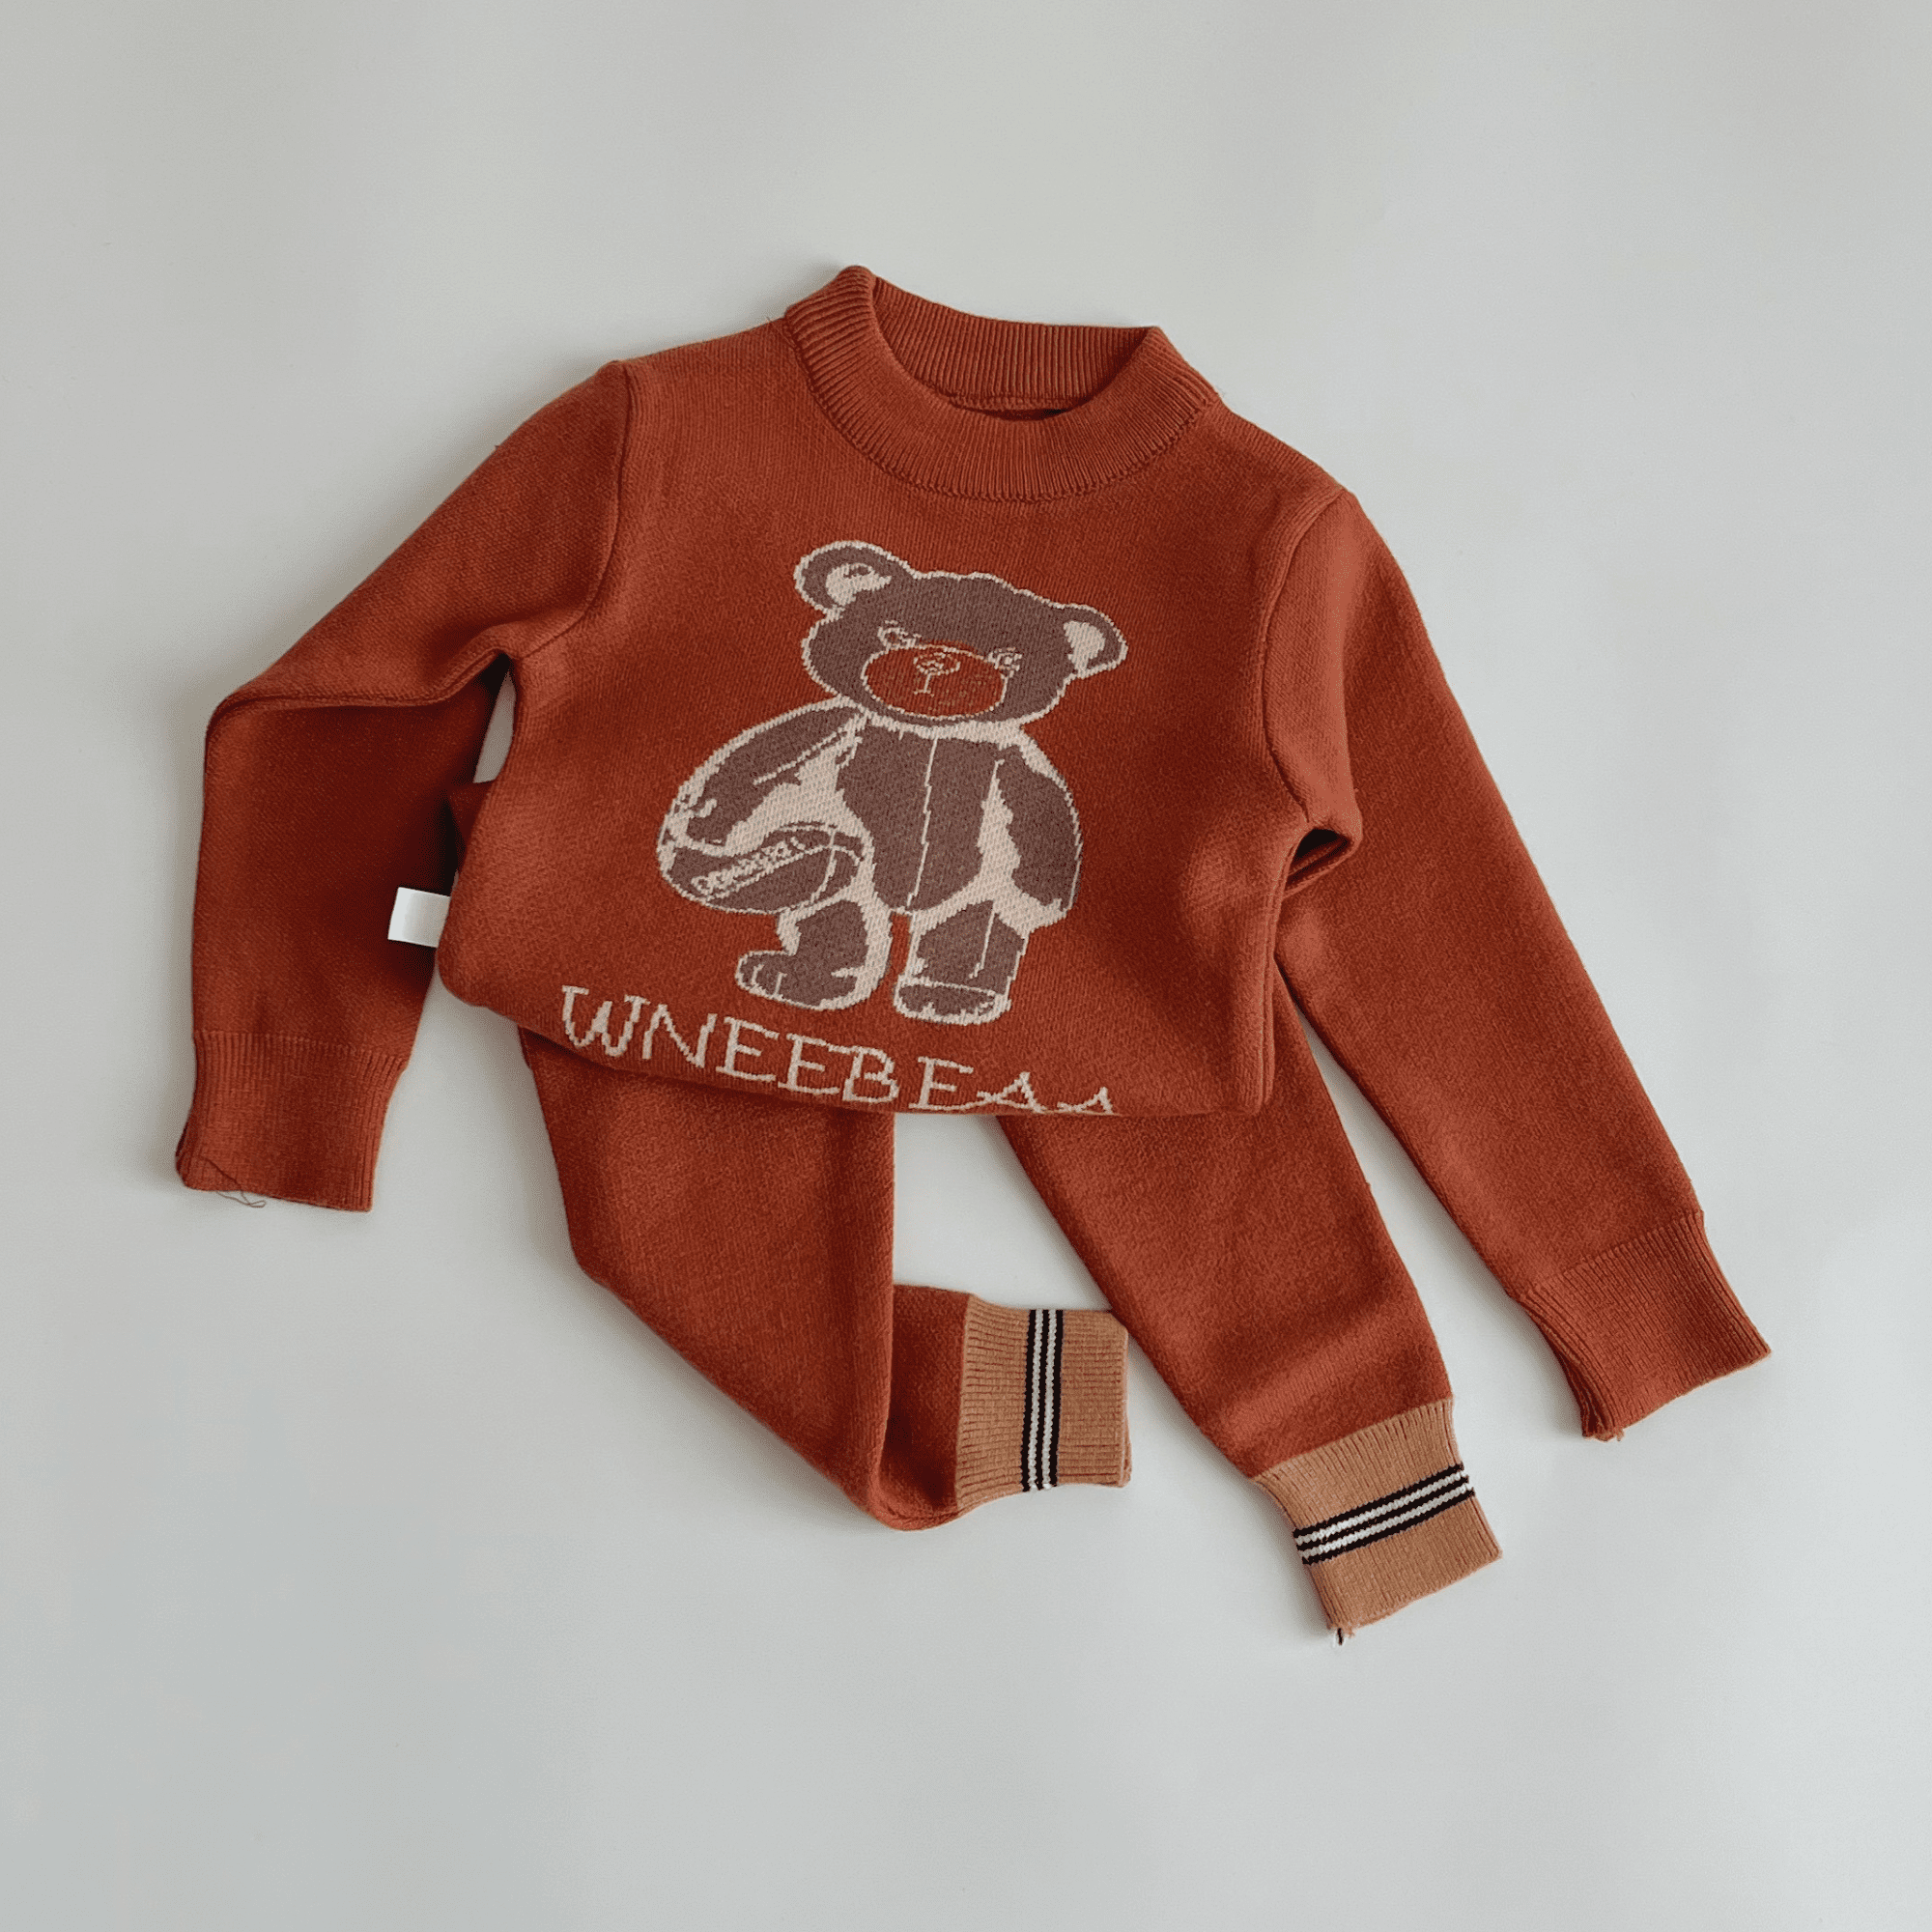 Clothes For Kids Girls Factory Price Natural Woolen Set Casual Each One In Opp Bag From Vietnam Manufacturer